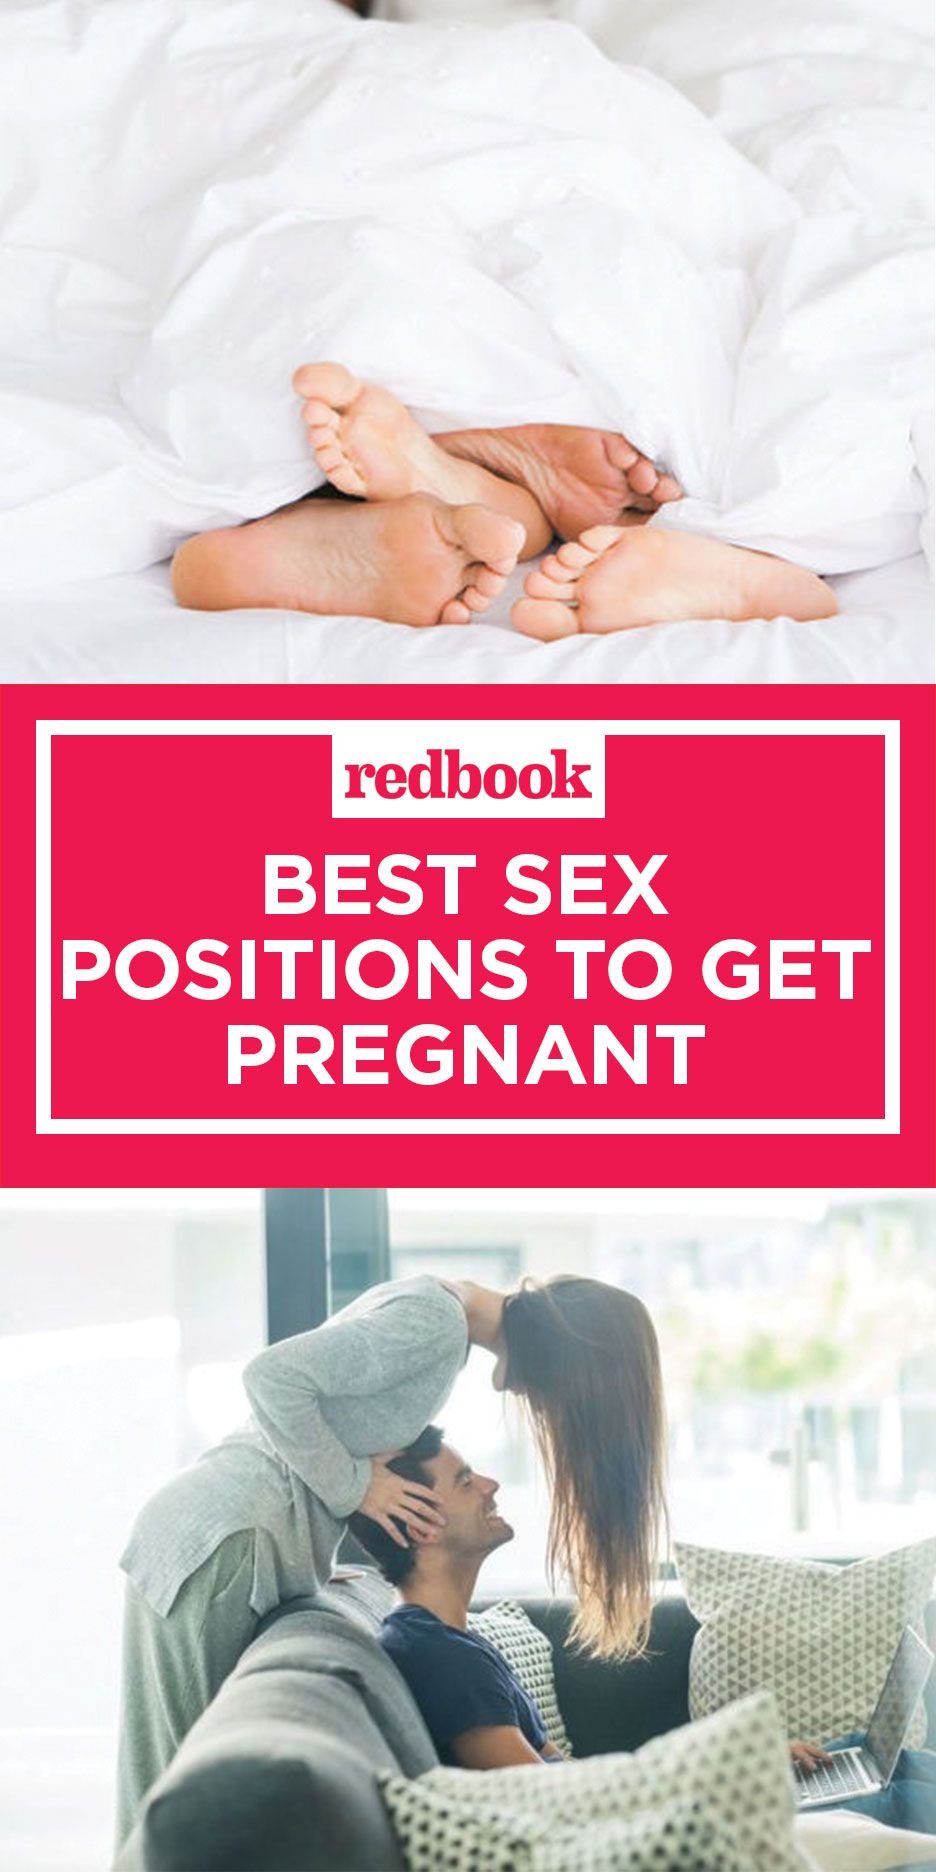 Top Positions To Get Pregnant